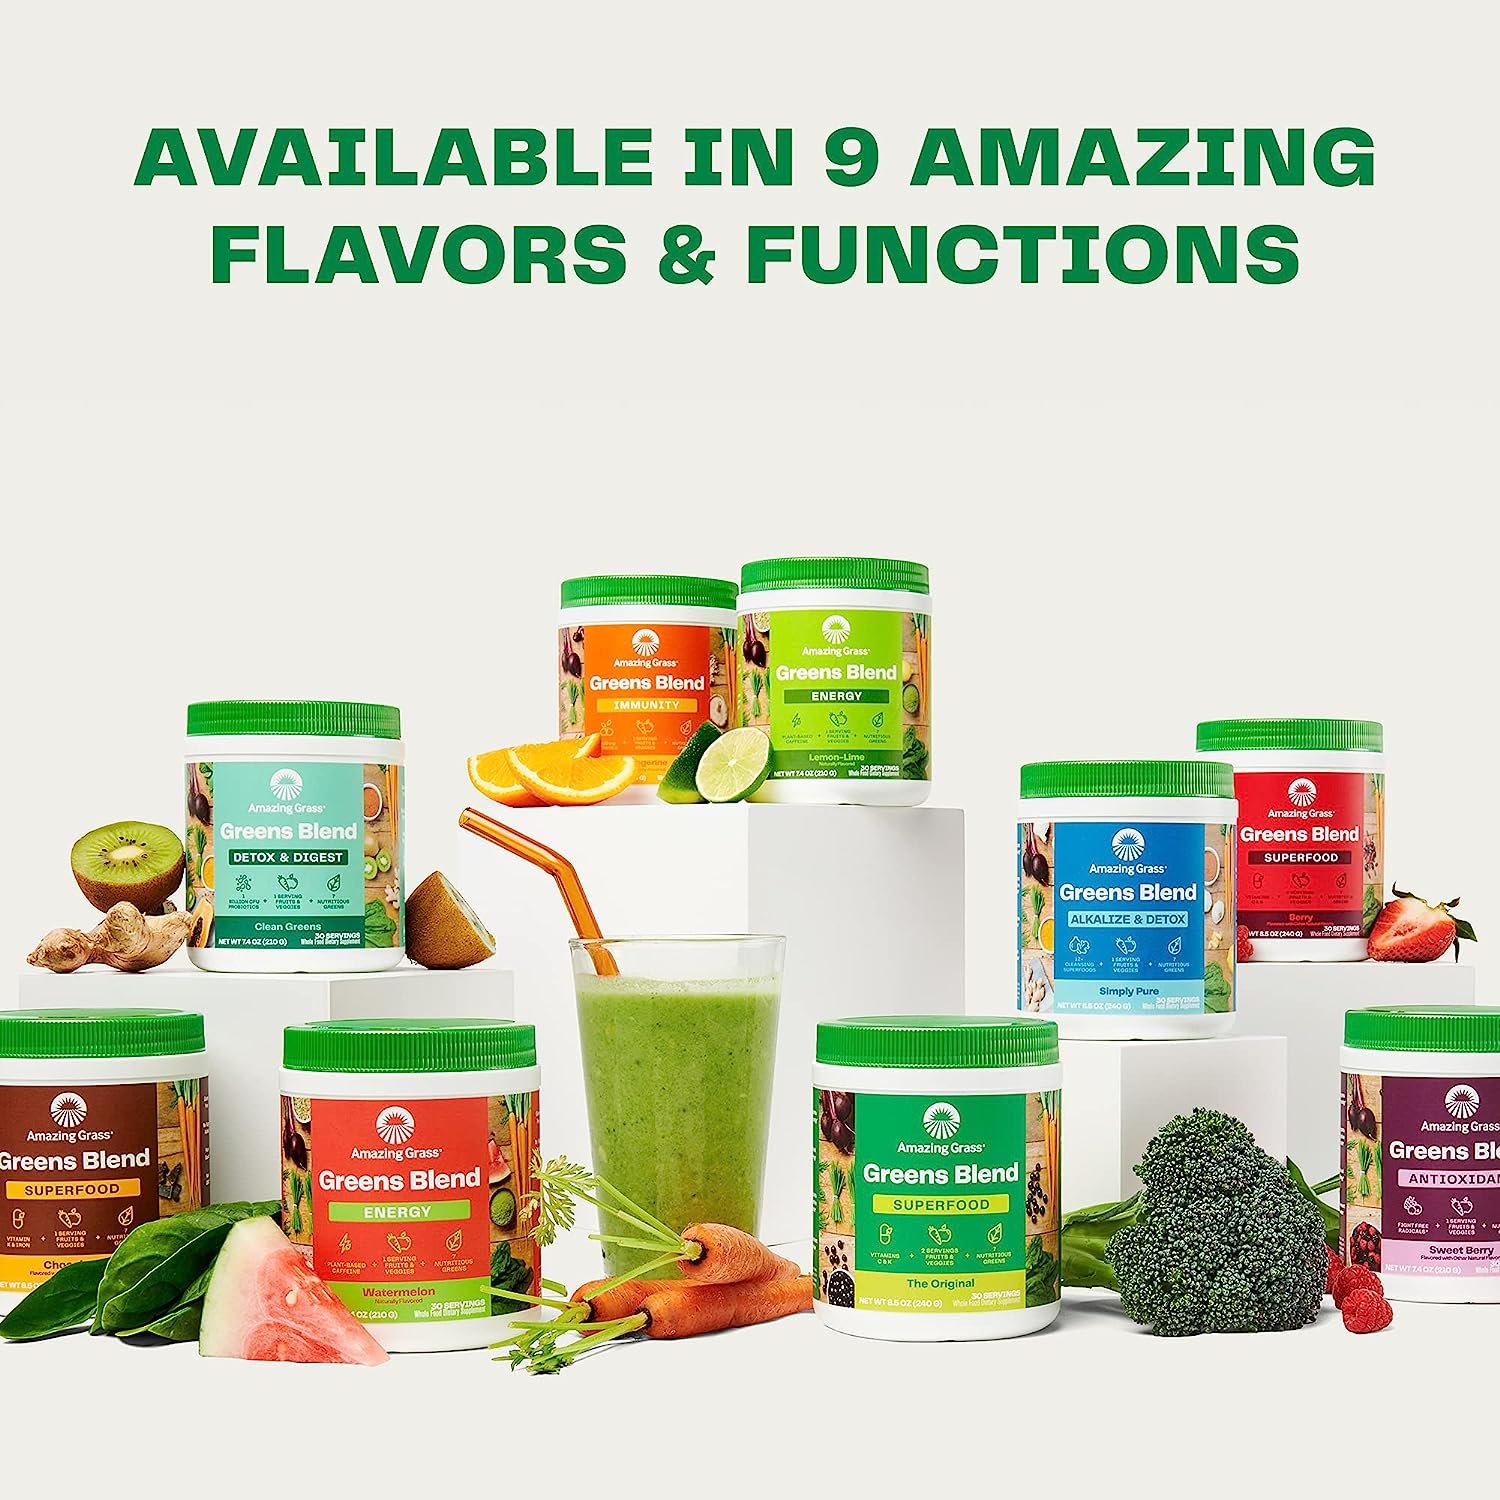 Amazing Grass Greens Blend Superfood Review